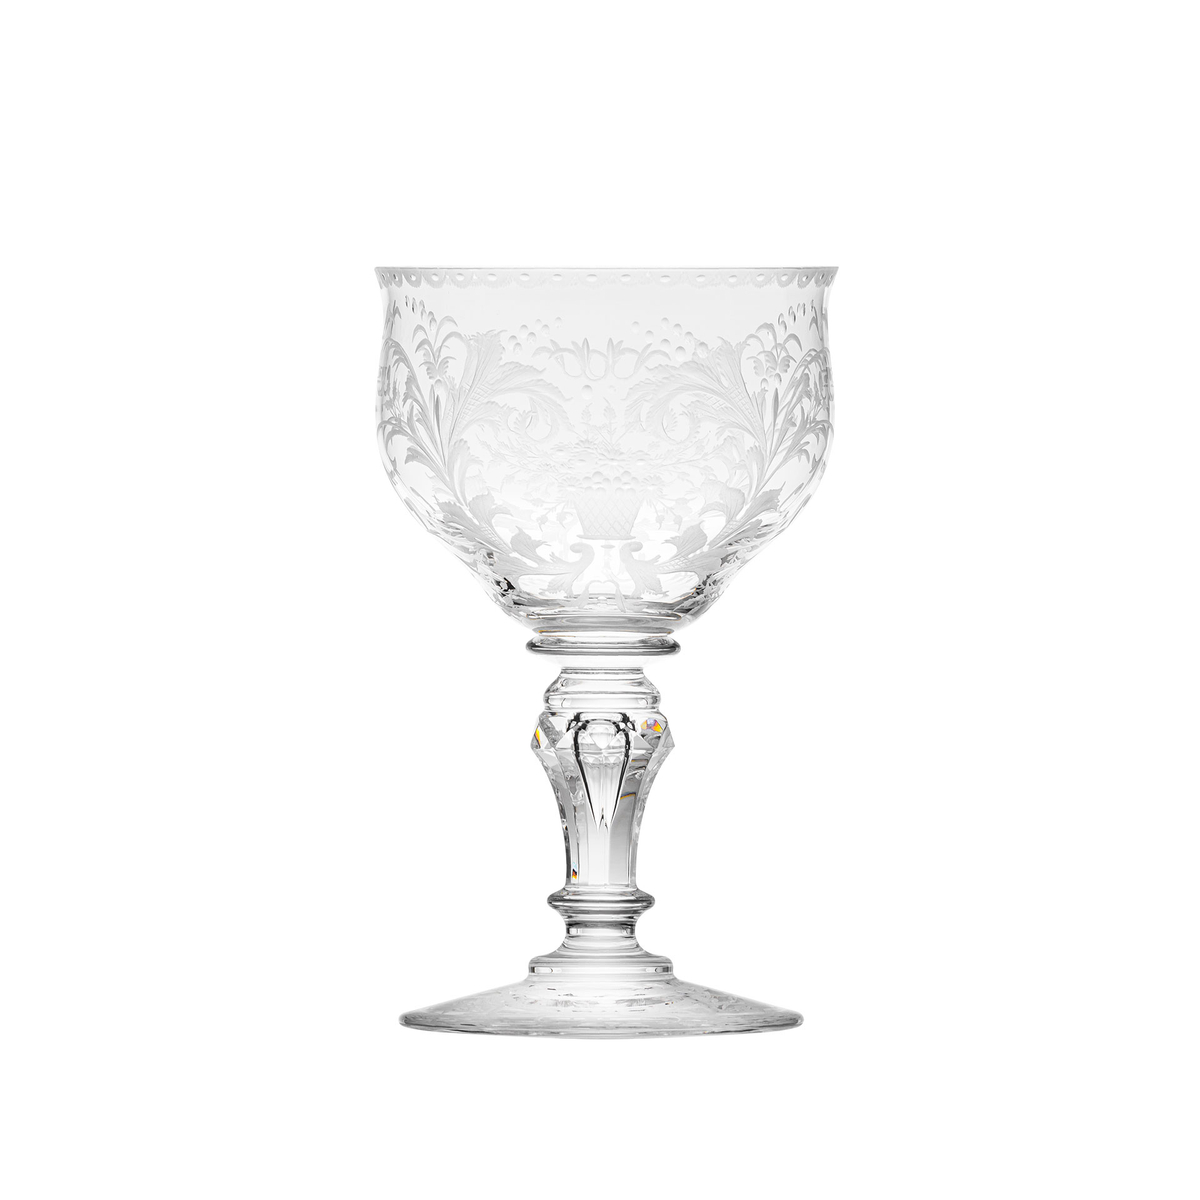 Pair Of 18Th Century Monogrammed Baroque wine Glasses For Sale at